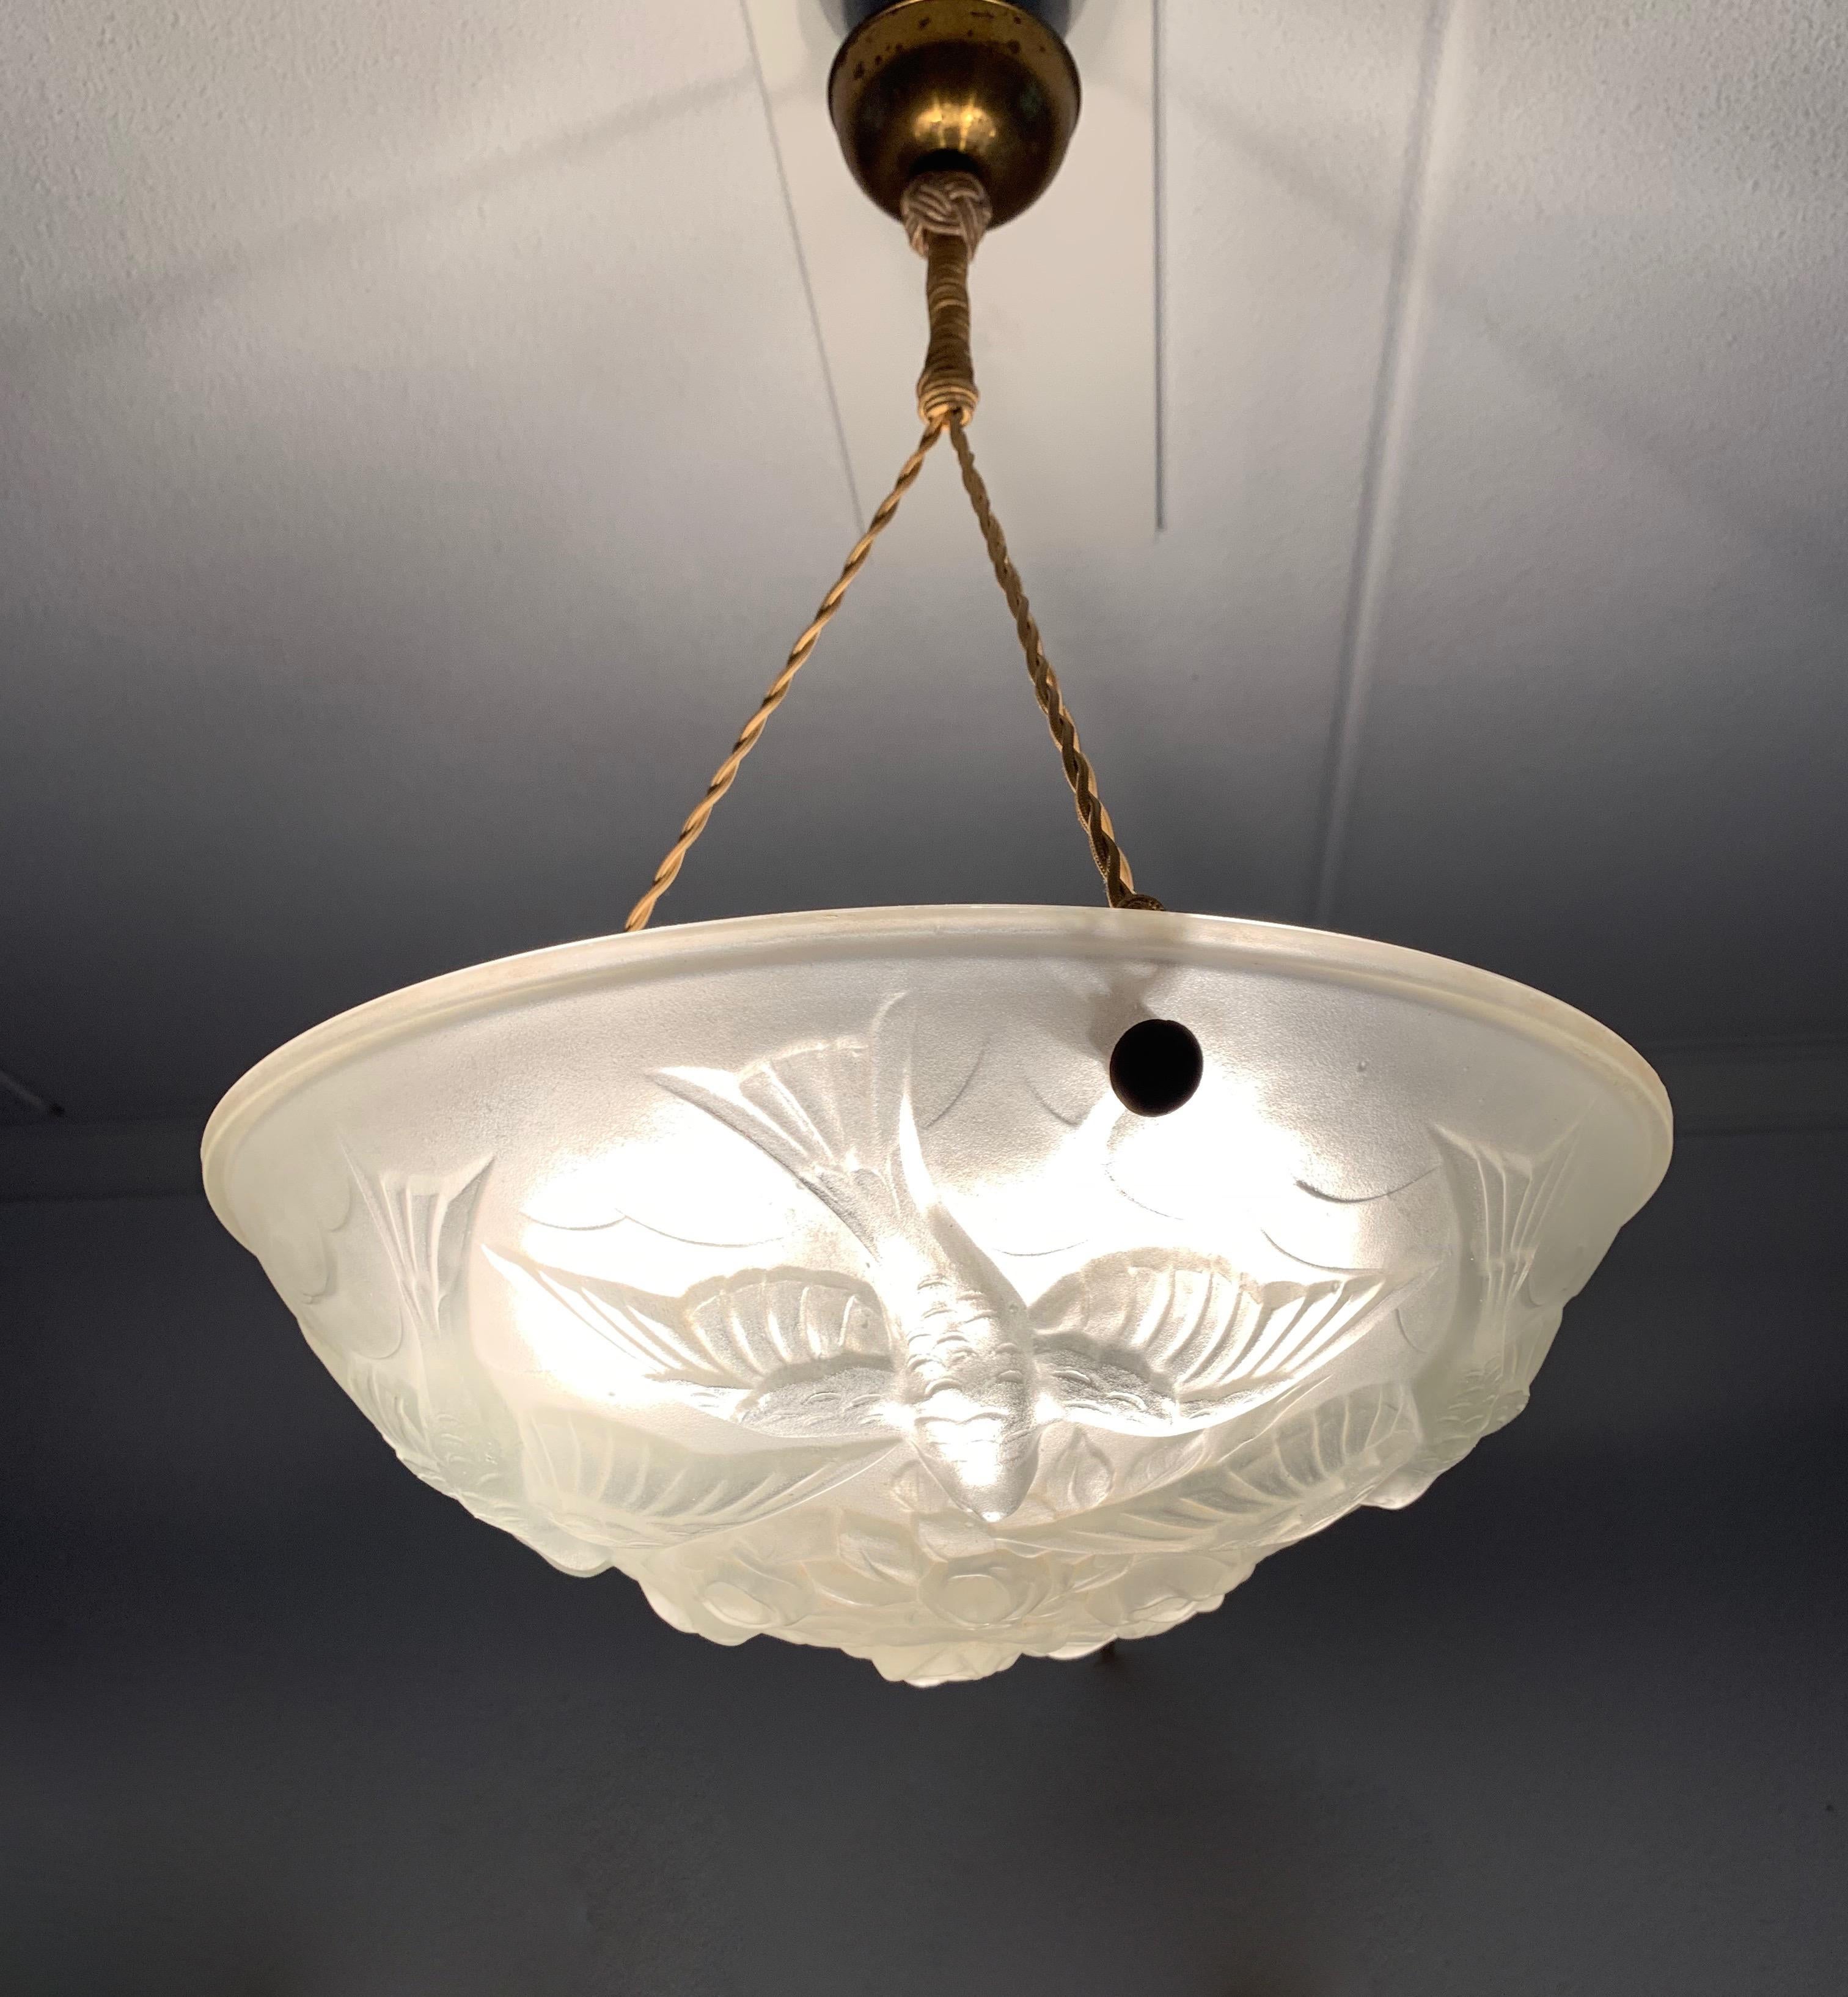 Stylish & Meaningful Art Deco Chandelier, Frosted Glass w. Flying Pigeons Sabine 3